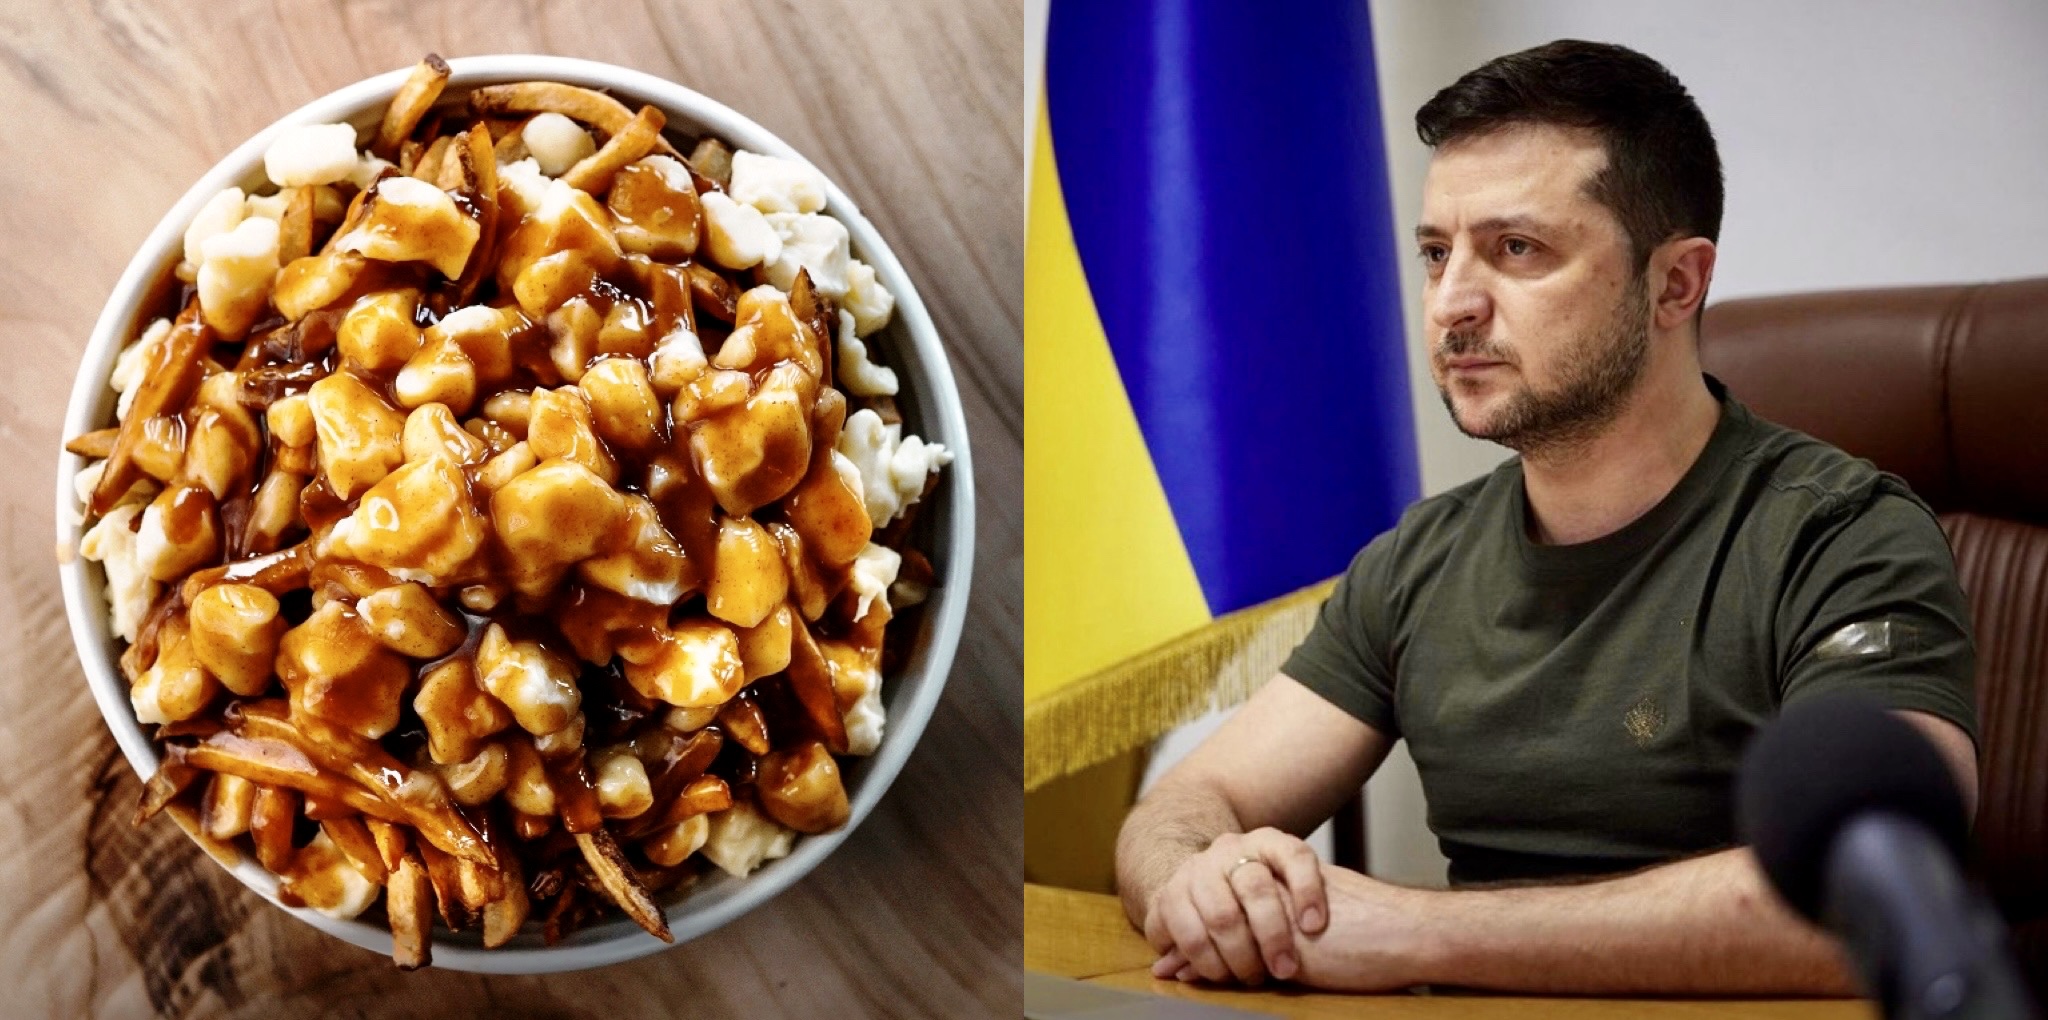 Frites Alors has finally changed the name of its Vladimir poutine… to Volodymyr